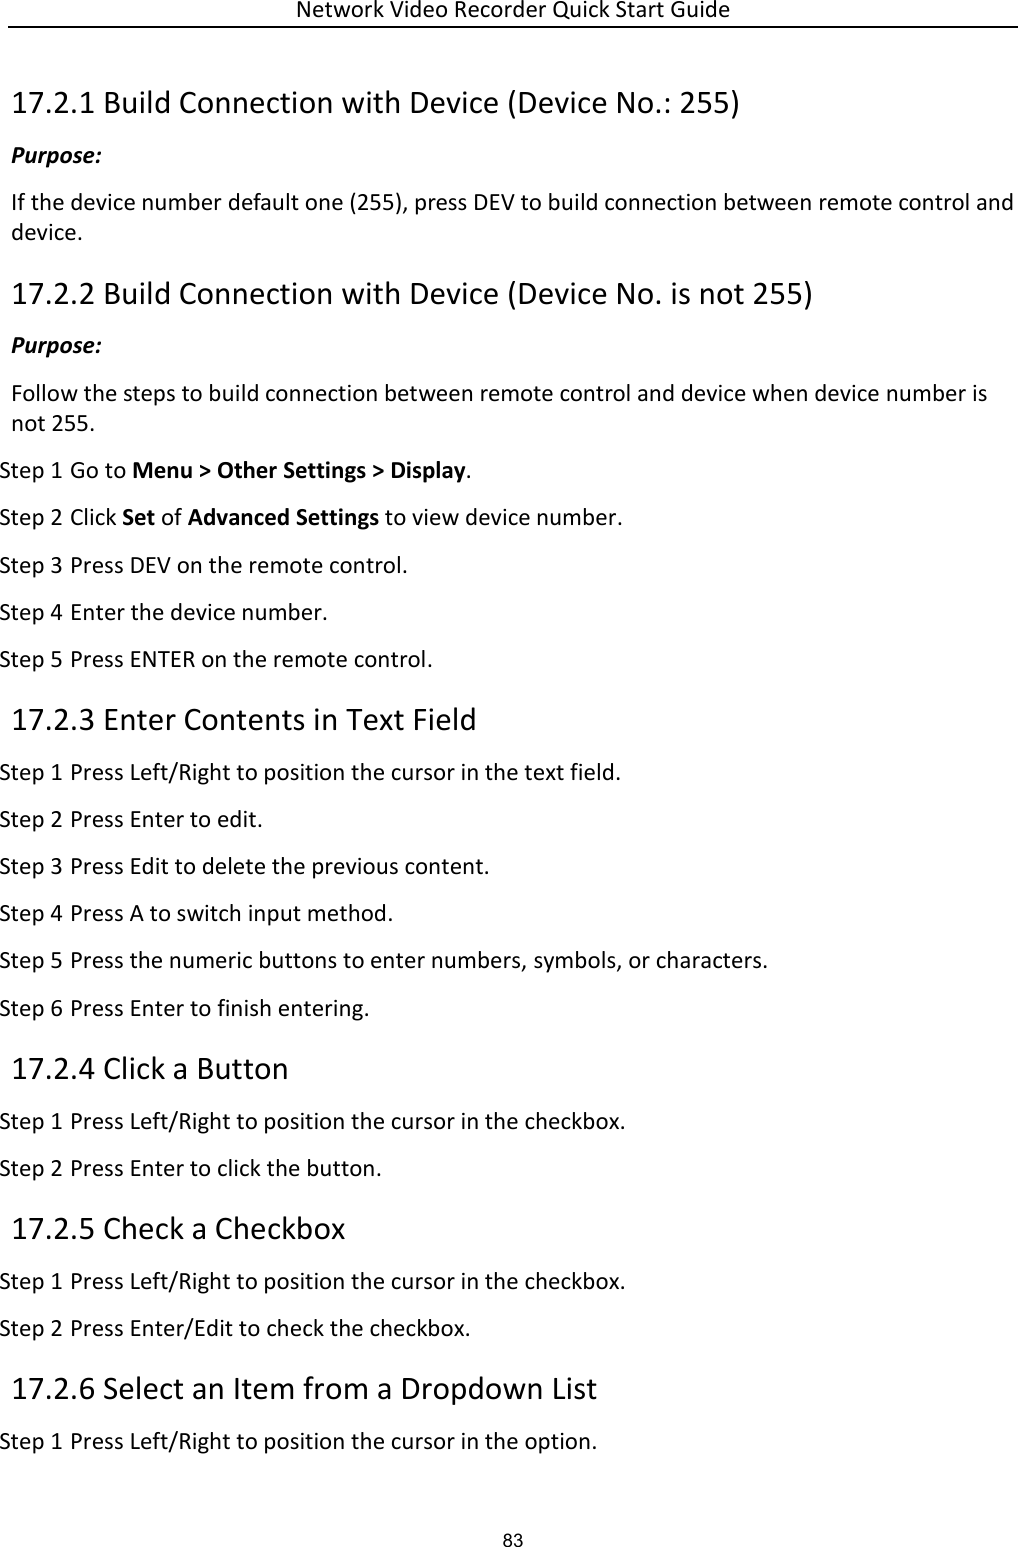 Network Video Recorder Quick Start Guide 83 17.2.1 Build Connection with Device (Device No.: 255) Purpose: If the device number default one (255), press DEV to build connection between remote control and device. 17.2.2 Build Connection with Device (Device No. is not 255) Purpose: Follow the steps to build connection between remote control and device when device number is not 255. Step 1 Go to Menu &gt; Other Settings &gt; Display. Step 2 Click Set of Advanced Settings to view device number. Step 3 Press DEV on the remote control. Step 4 Enter the device number. Step 5 Press ENTER on the remote control. 17.2.3 Enter Contents in Text Field Step 1 Press Left/Right to position the cursor in the text field. Step 2 Press Enter to edit. Step 3 Press Edit to delete the previous content. Step 4 Press A to switch input method. Step 5 Press the numeric buttons to enter numbers, symbols, or characters. Step 6 Press Enter to finish entering. 17.2.4 Click a Button Step 1 Press Left/Right to position the cursor in the checkbox. Step 2 Press Enter to click the button. 17.2.5 Check a Checkbox Step 1 Press Left/Right to position the cursor in the checkbox. Step 2 Press Enter/Edit to check the checkbox. 17.2.6 Select an Item from a Dropdown List Step 1 Press Left/Right to position the cursor in the option. 